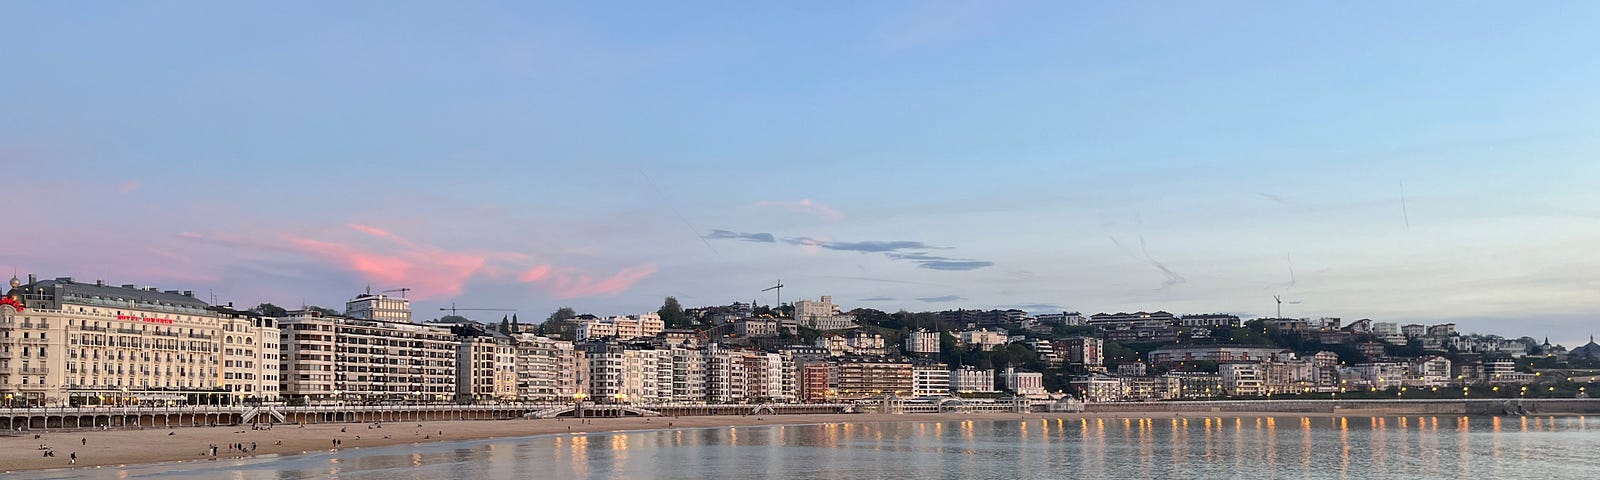 Sunset glows on the water and fronts of buildings that circle the beach in San Sebastian.